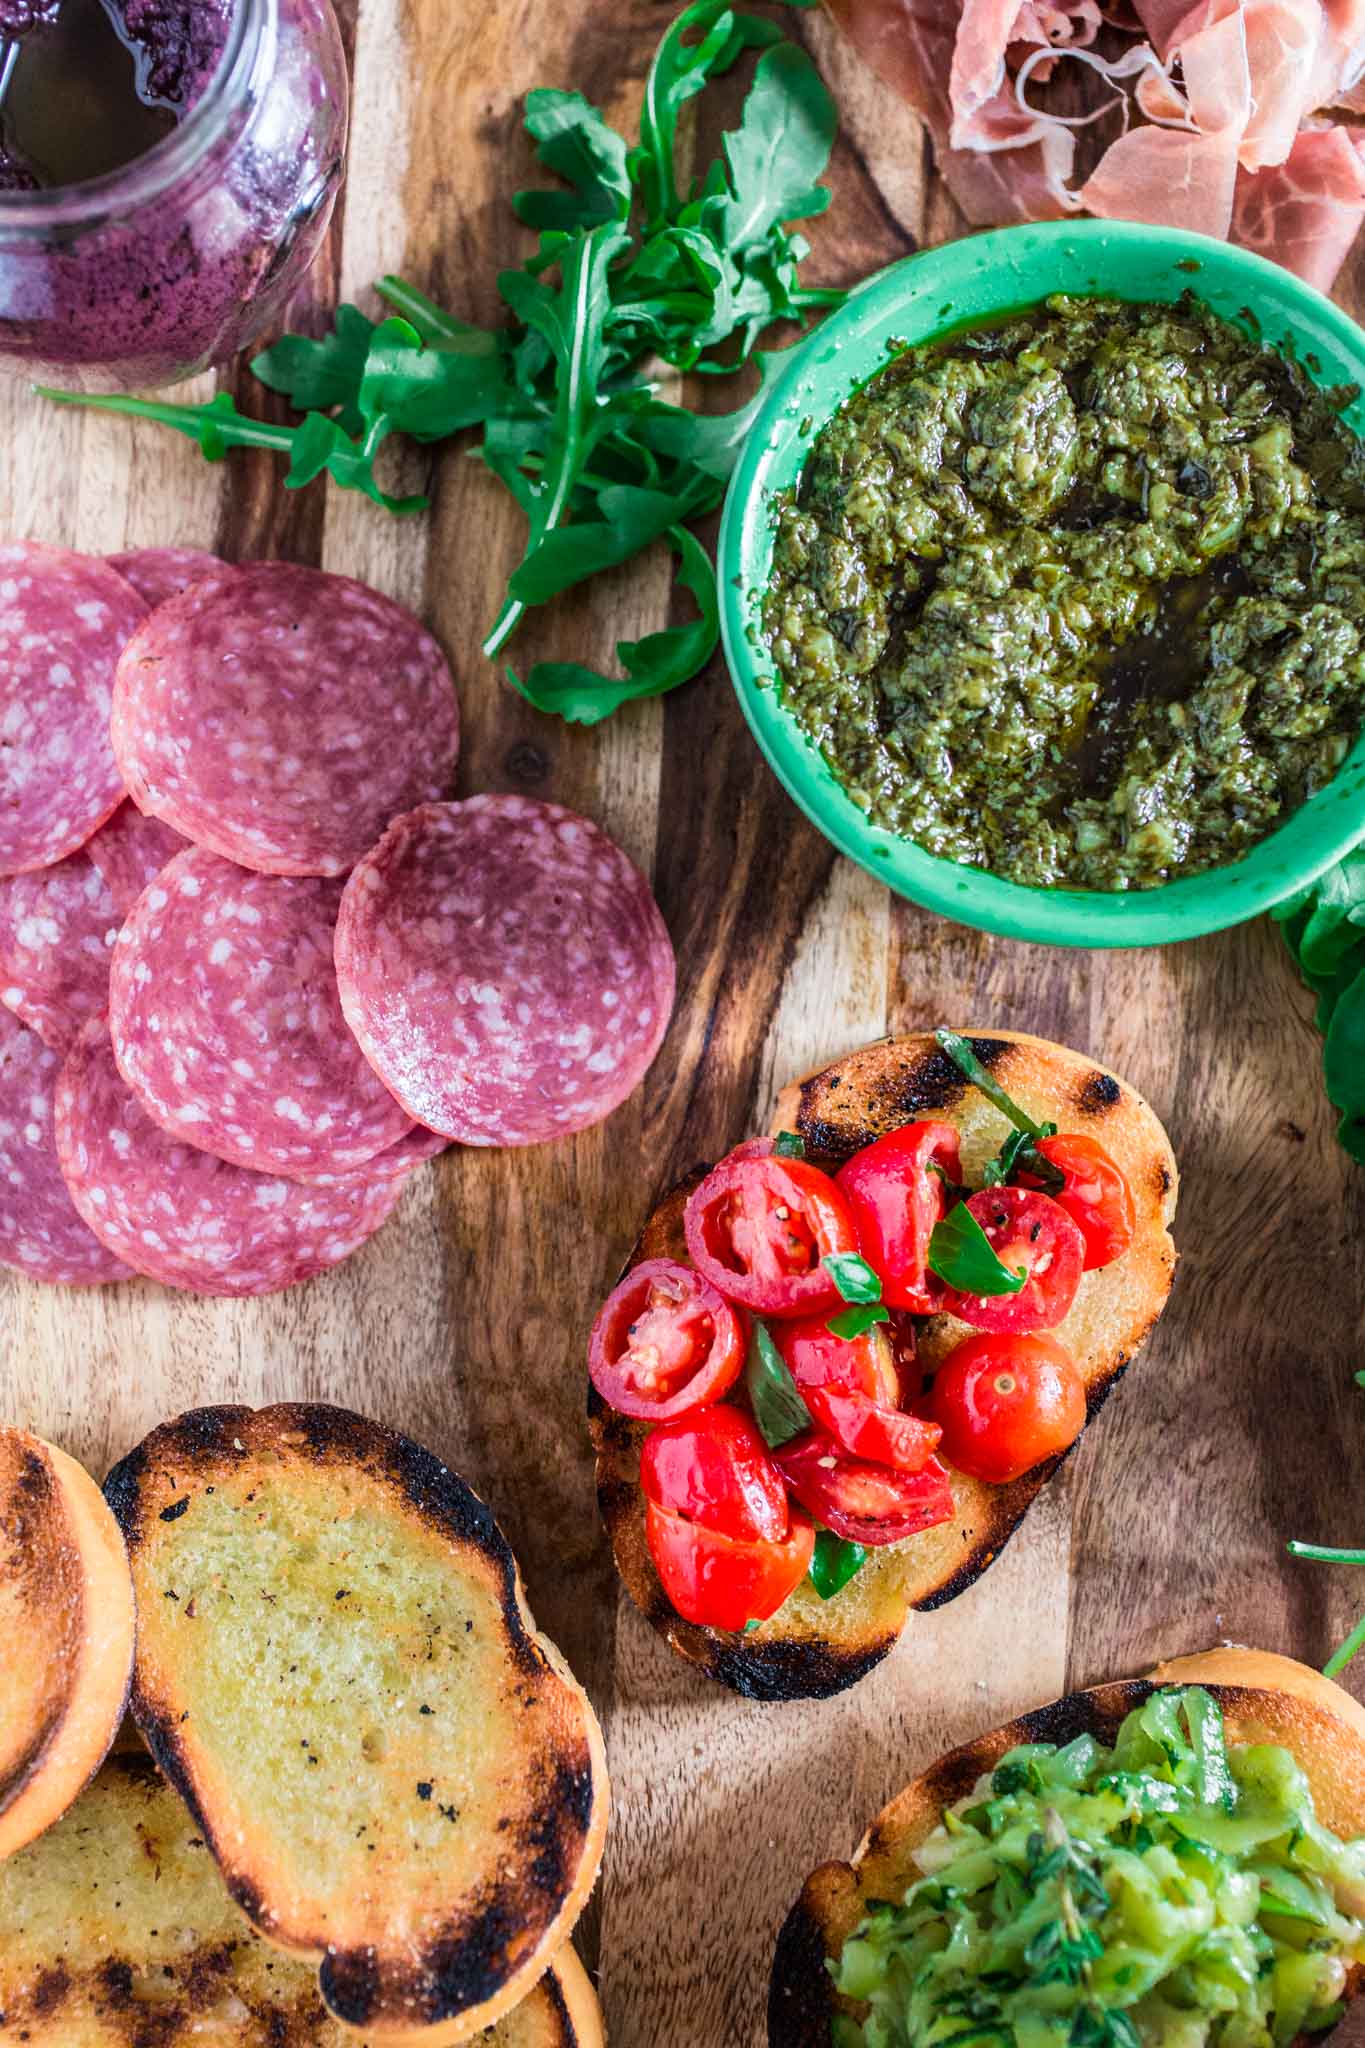 Build Your Own Bruschetta Bar | www.oliviascuisine.com | A step by step tutorial so you can set up a beautiful and fun bruschetta station for your next party!